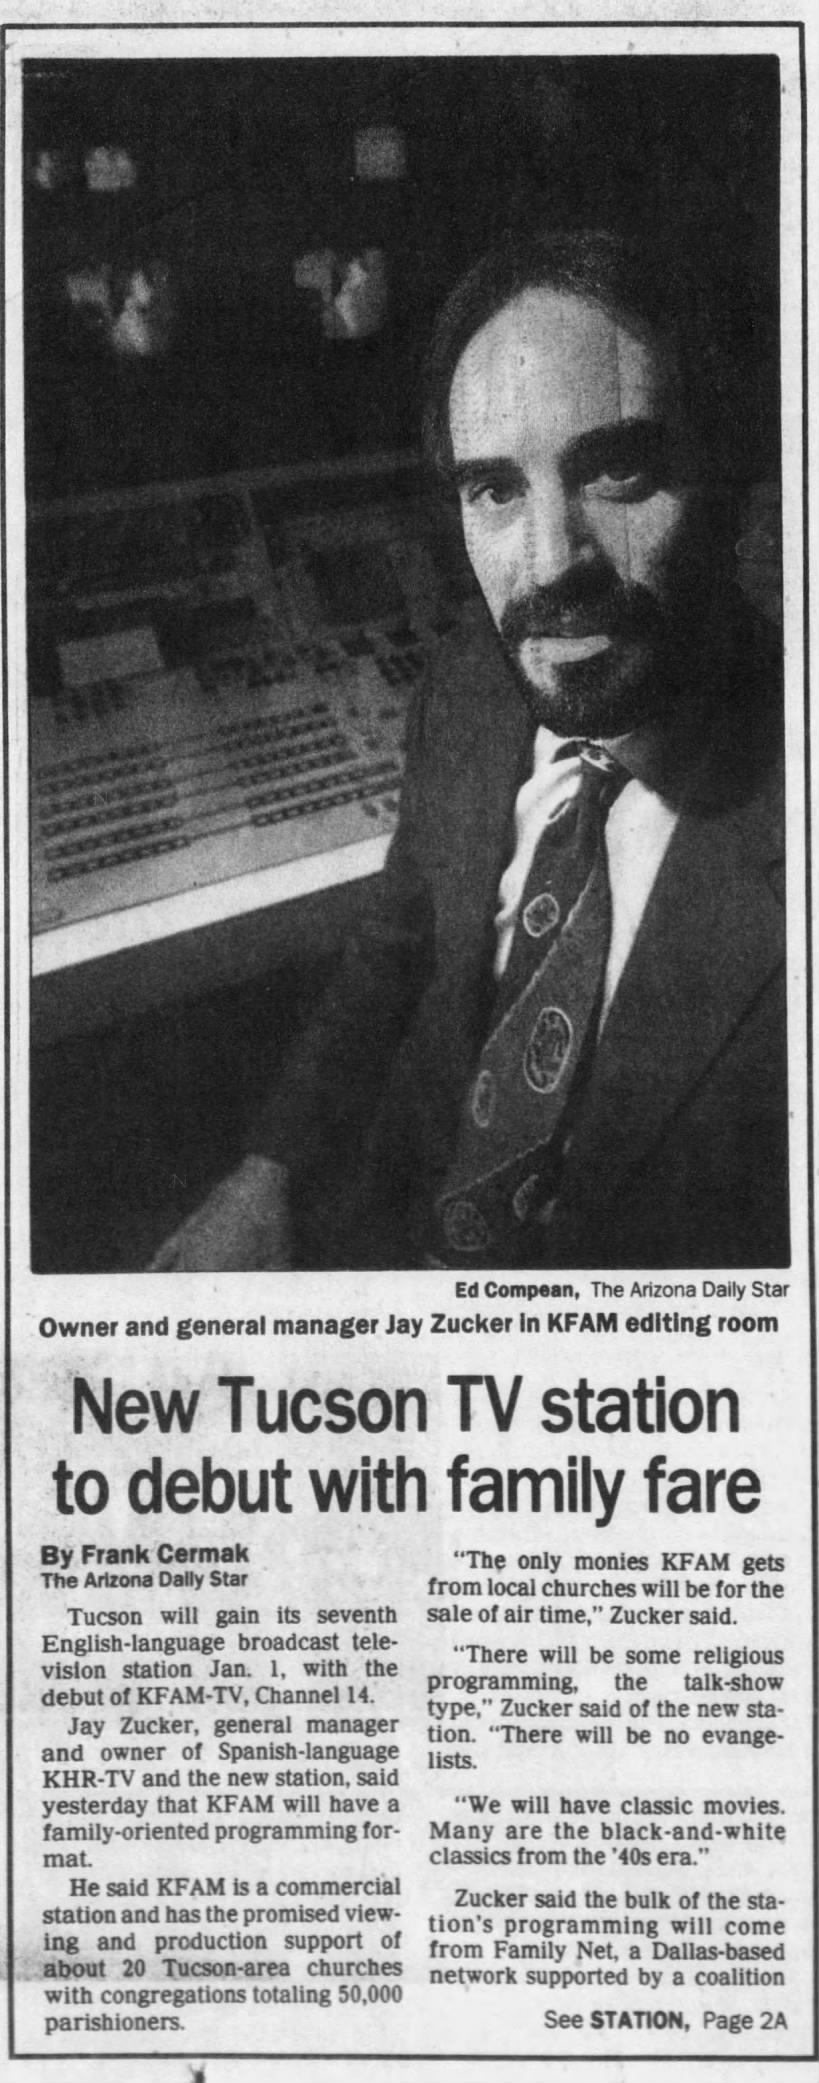 New Tucson TV station to debut with family fare